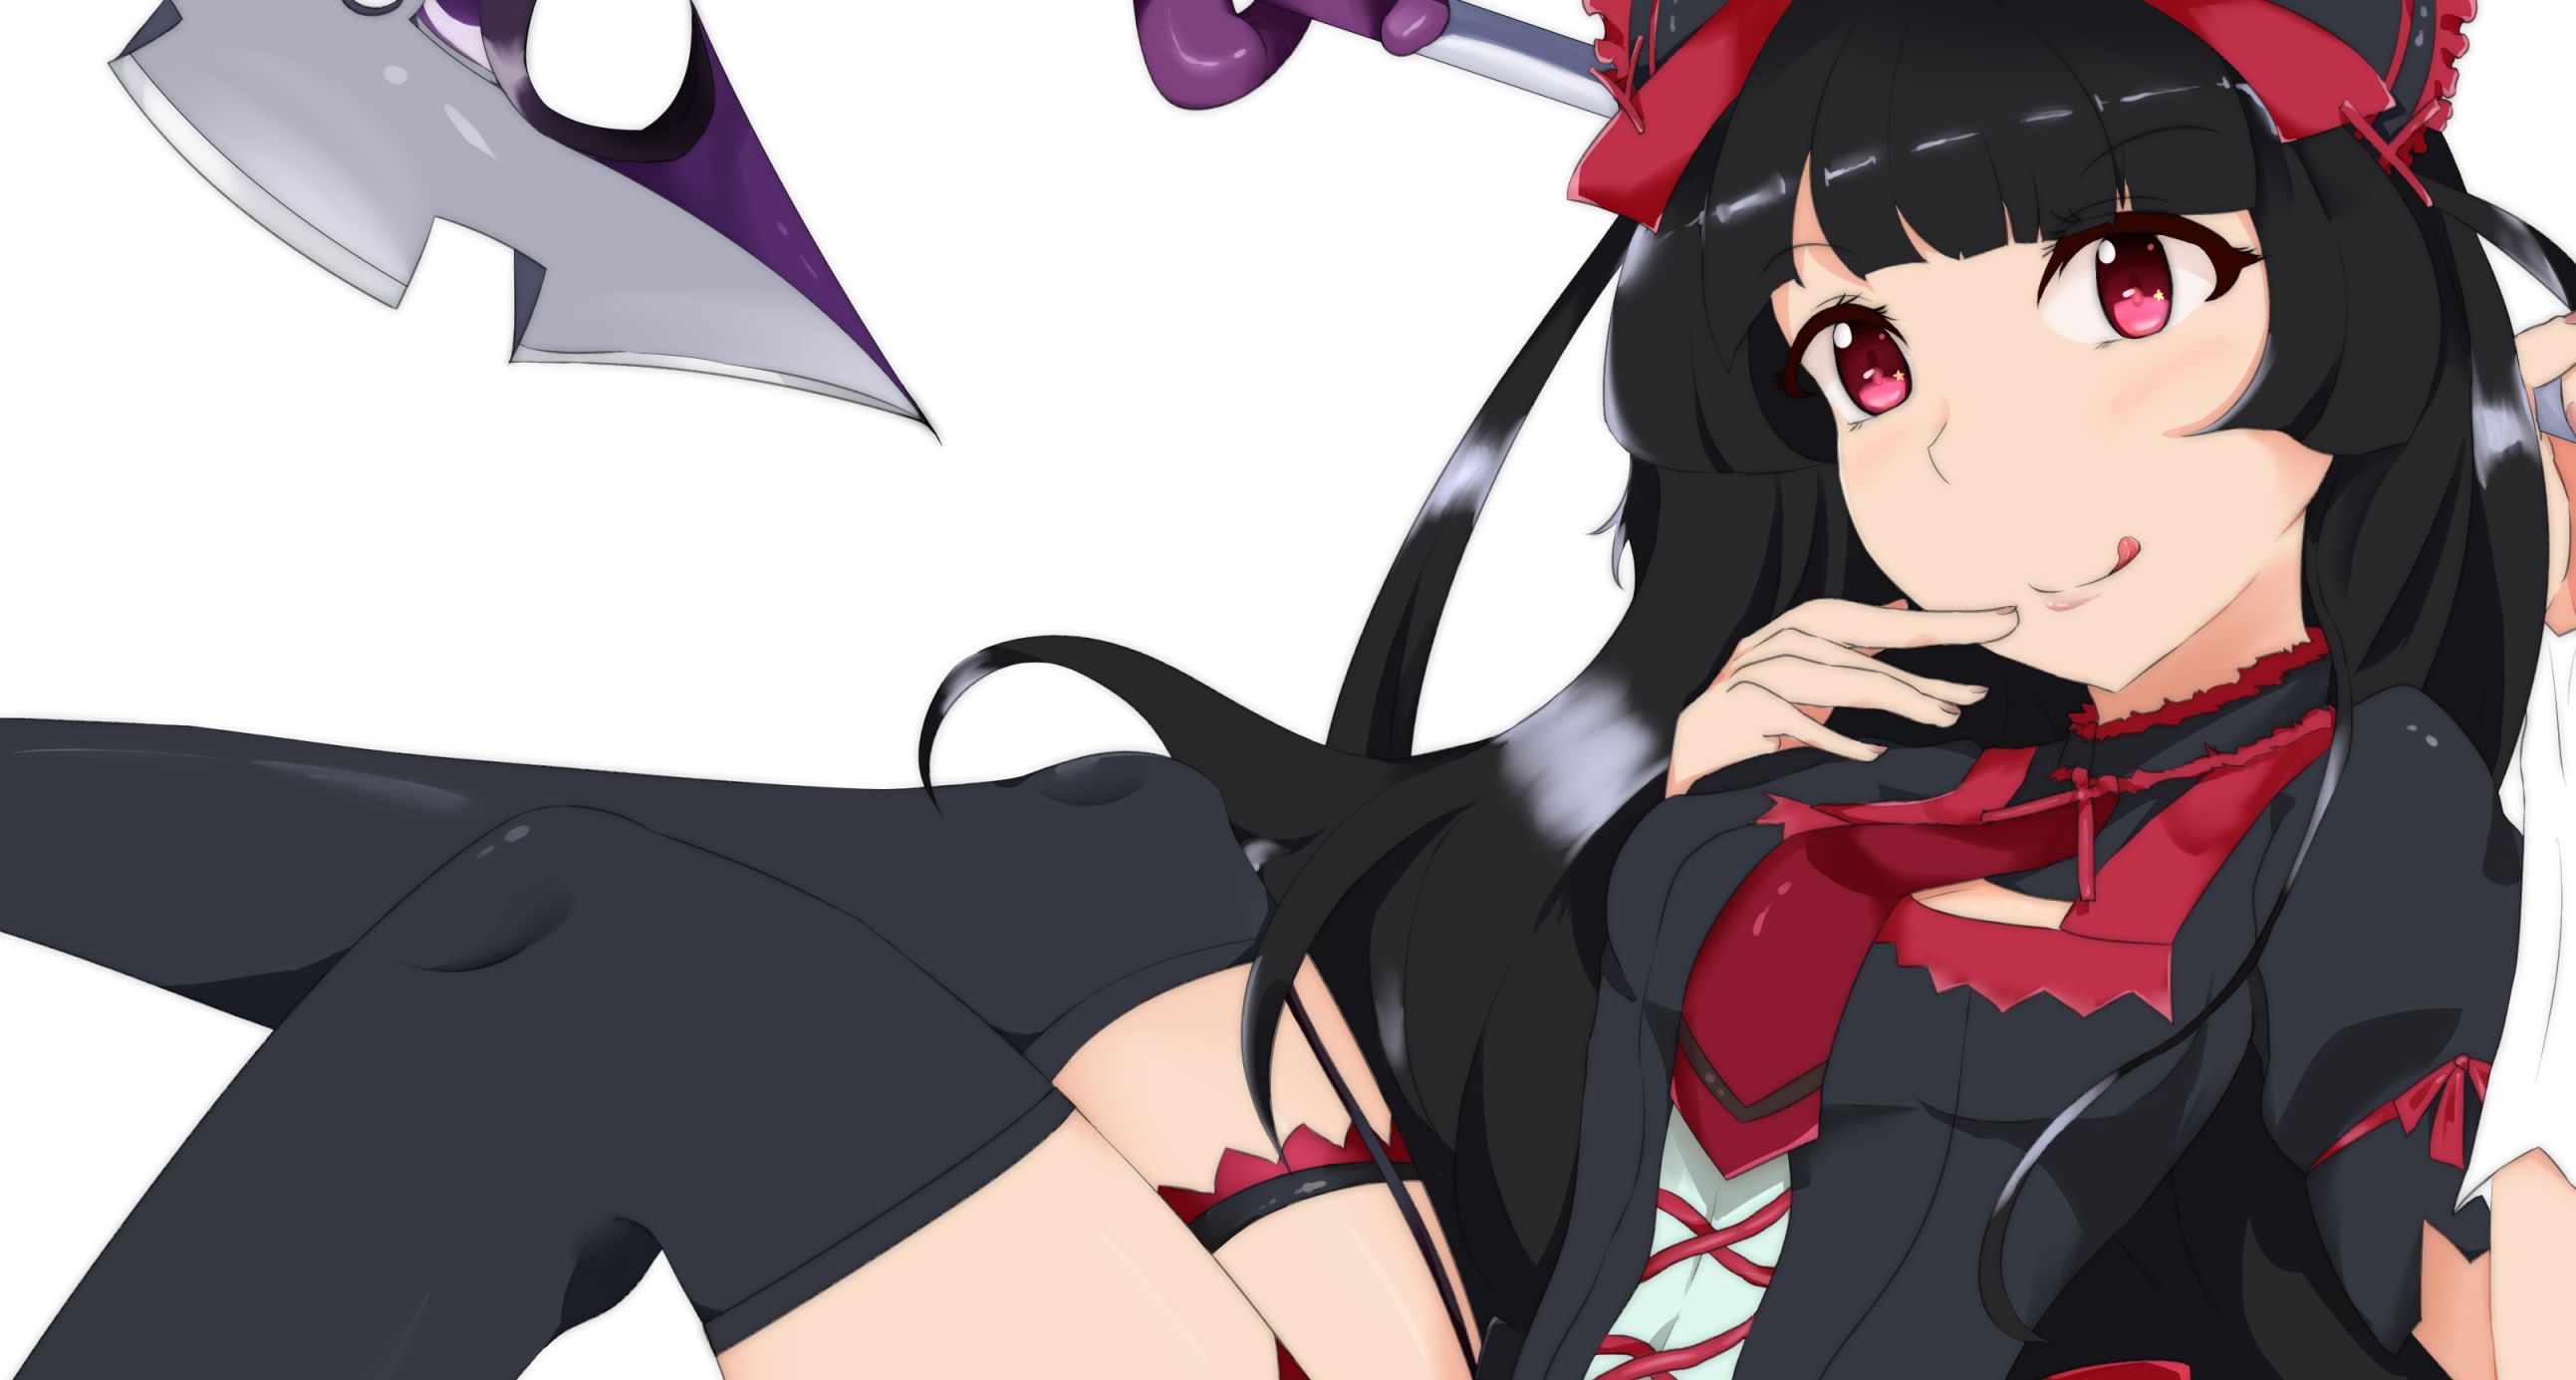 Free download wallpaper Anime, Gate, Rory Mercury on your PC desktop